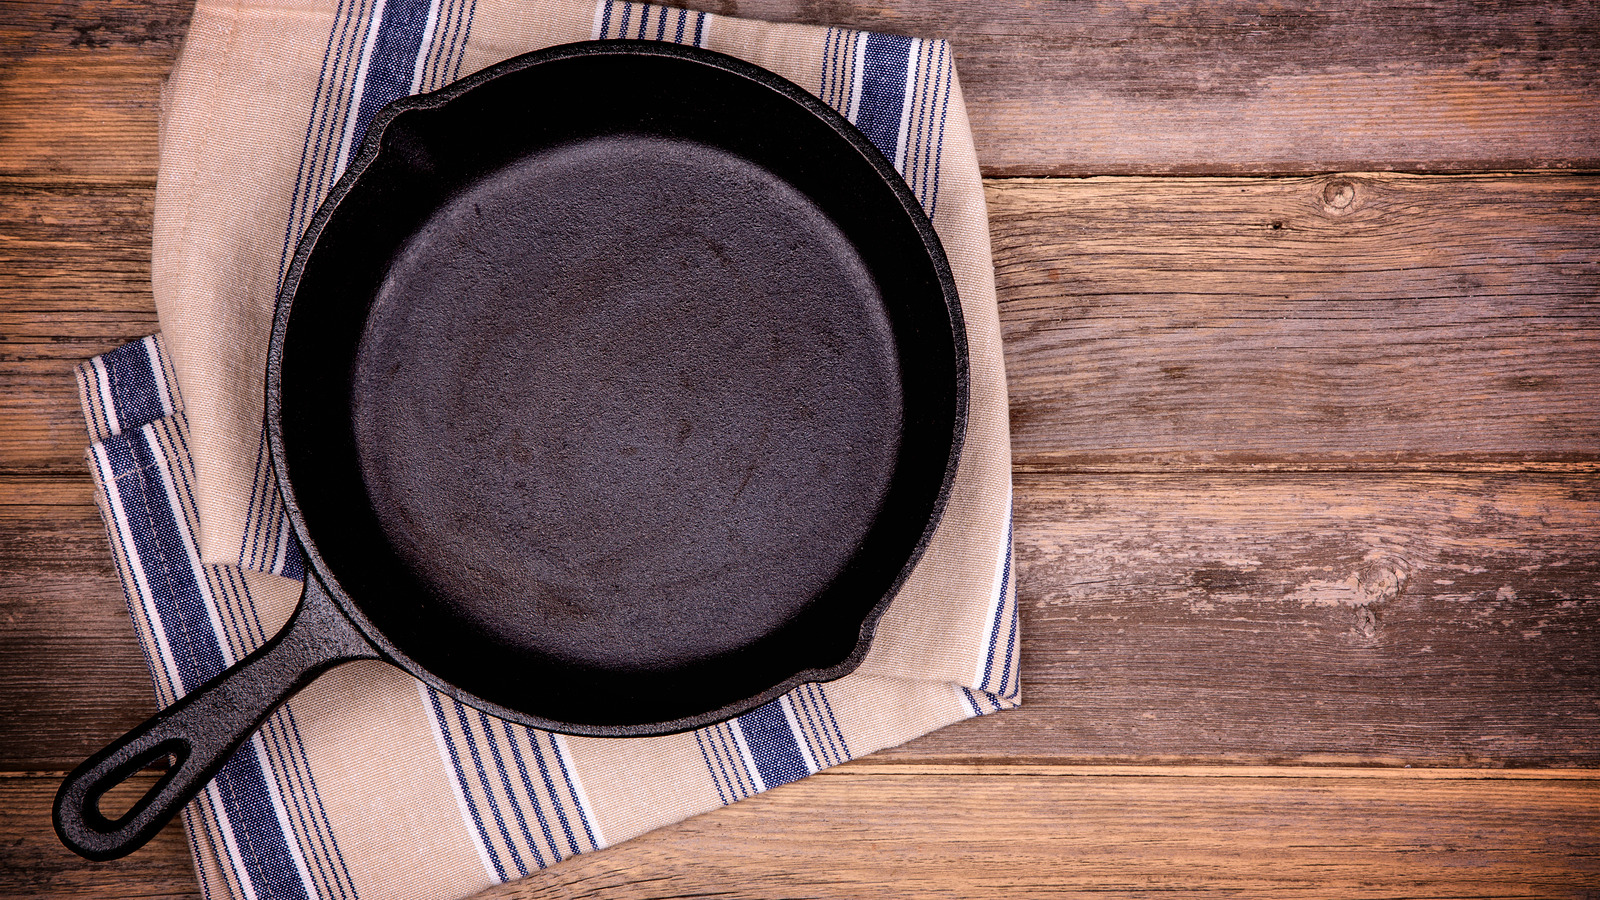 Here's Your Ultimate Guide to Cast Iron Pans (Featuring Steak) -  nocrumbsleft